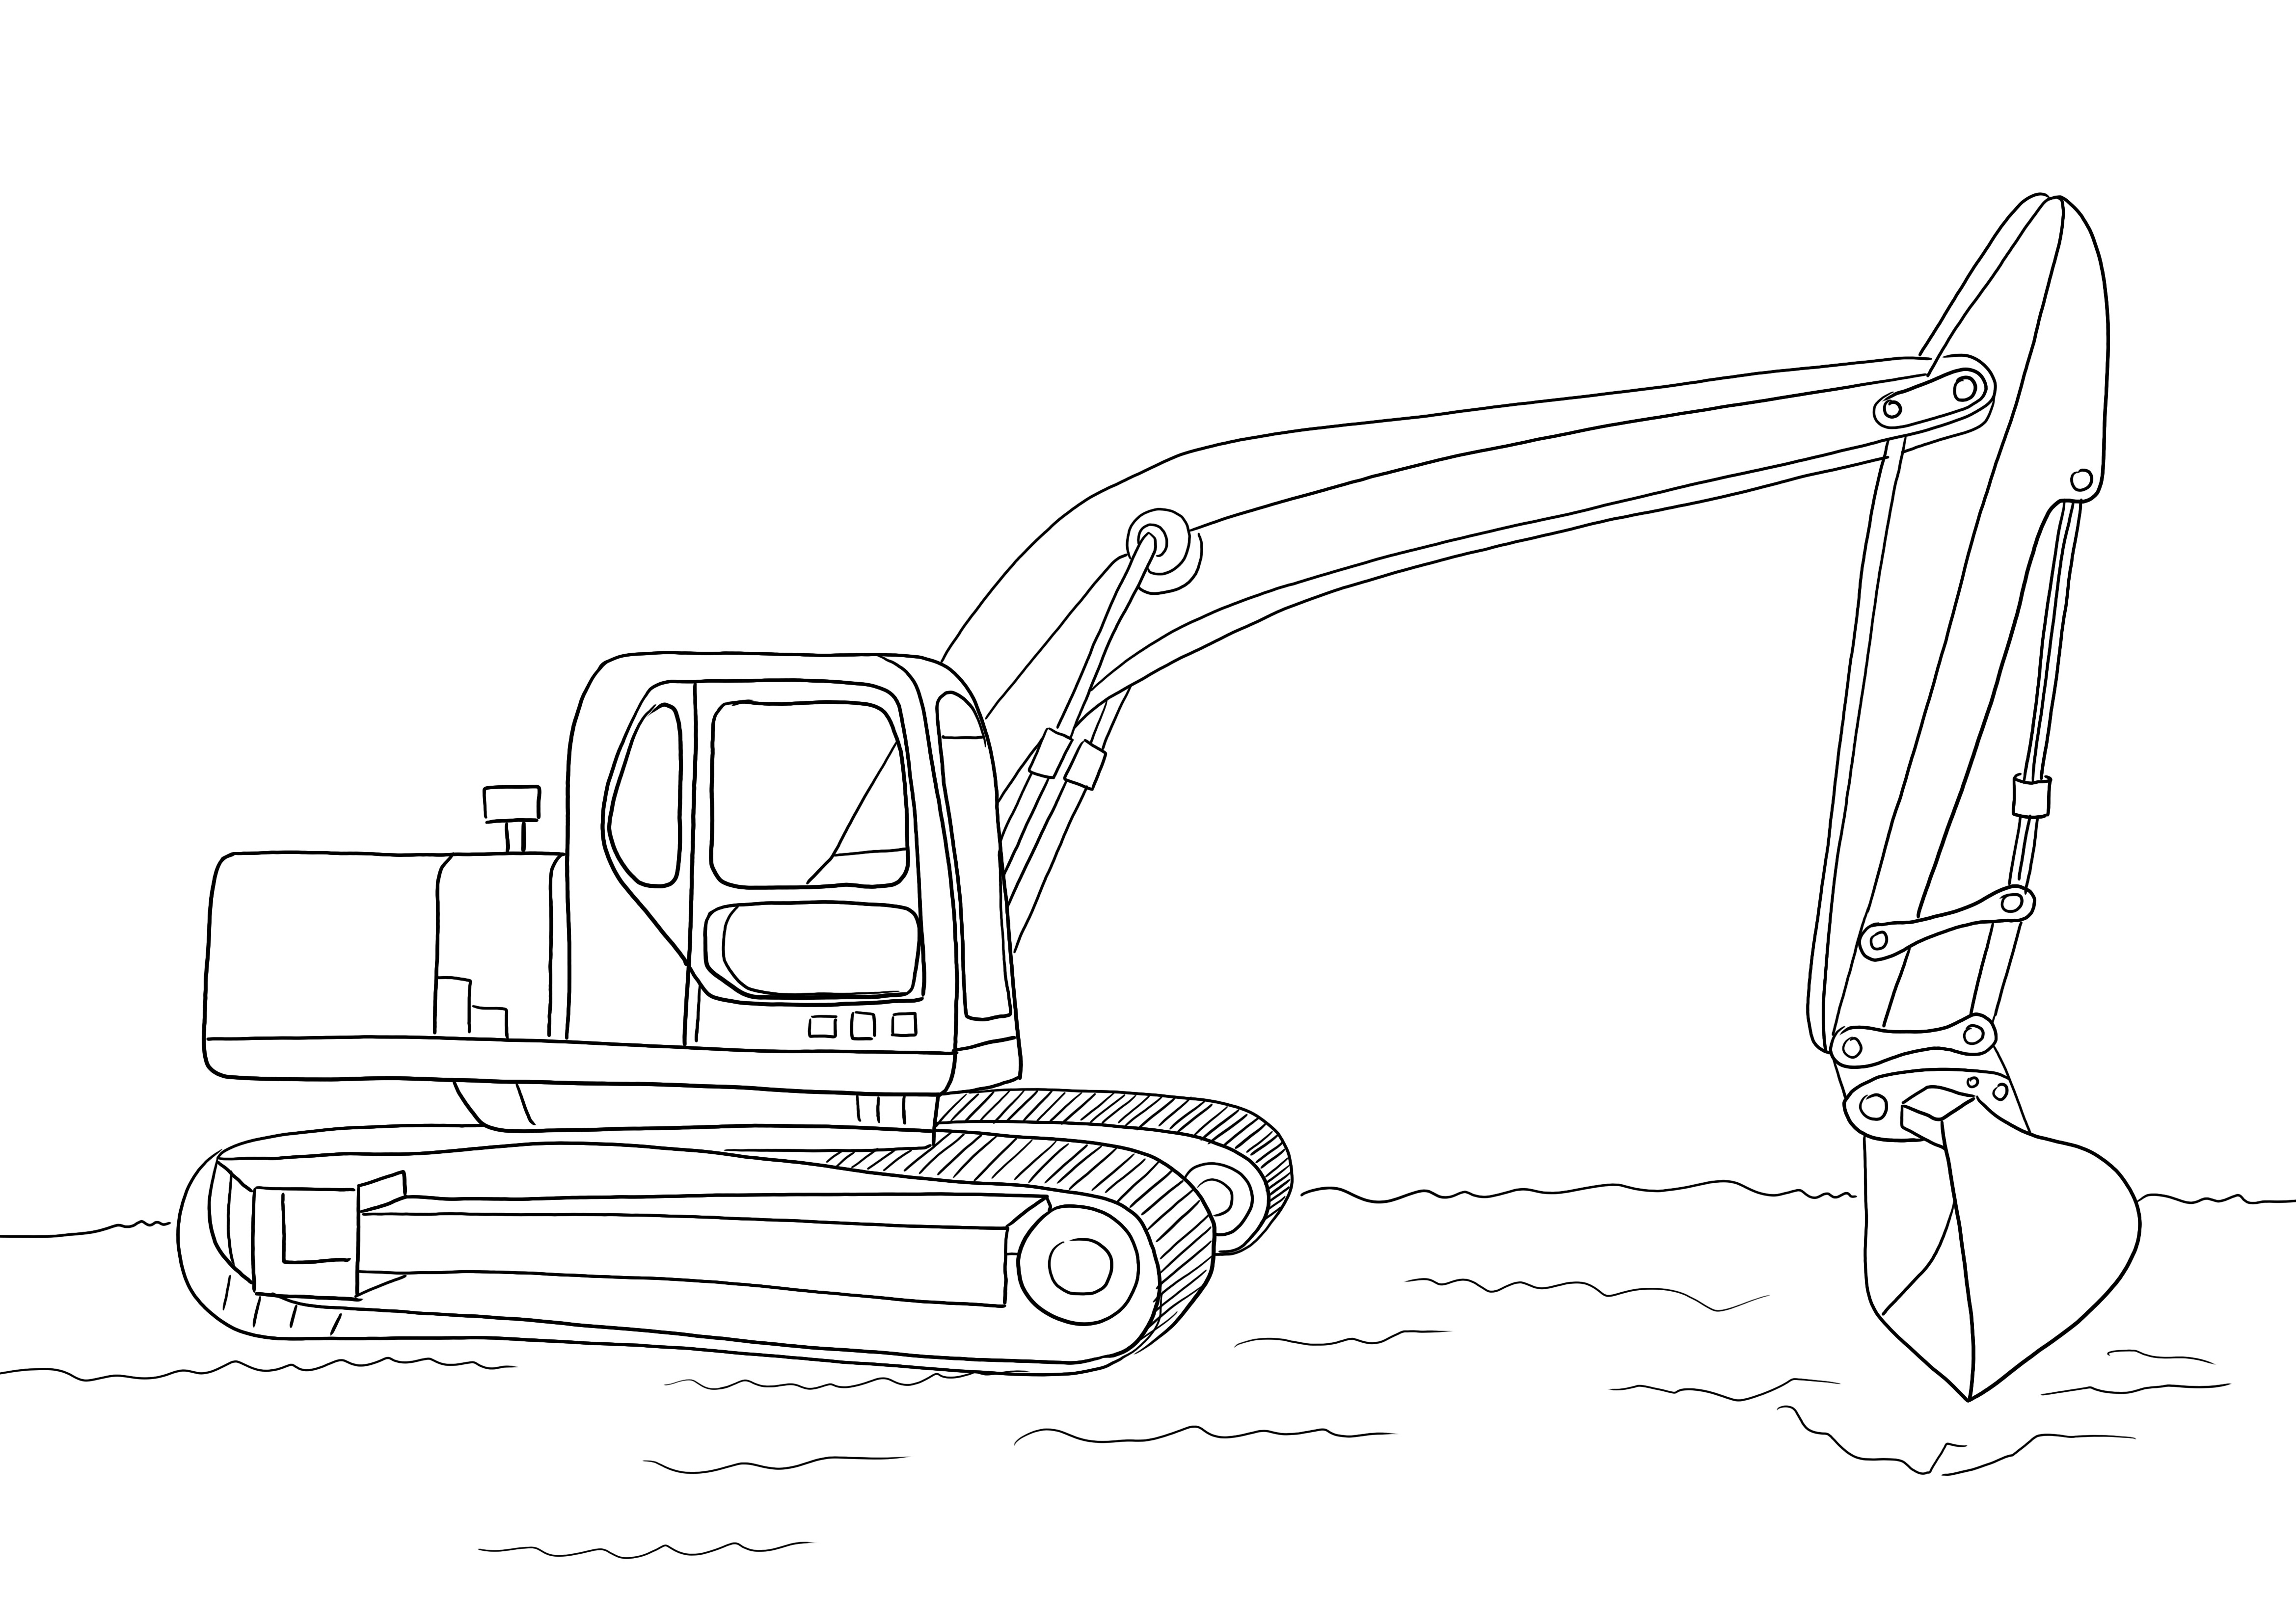 Excavator coloring page- a fun way to learn about types of means of transportation